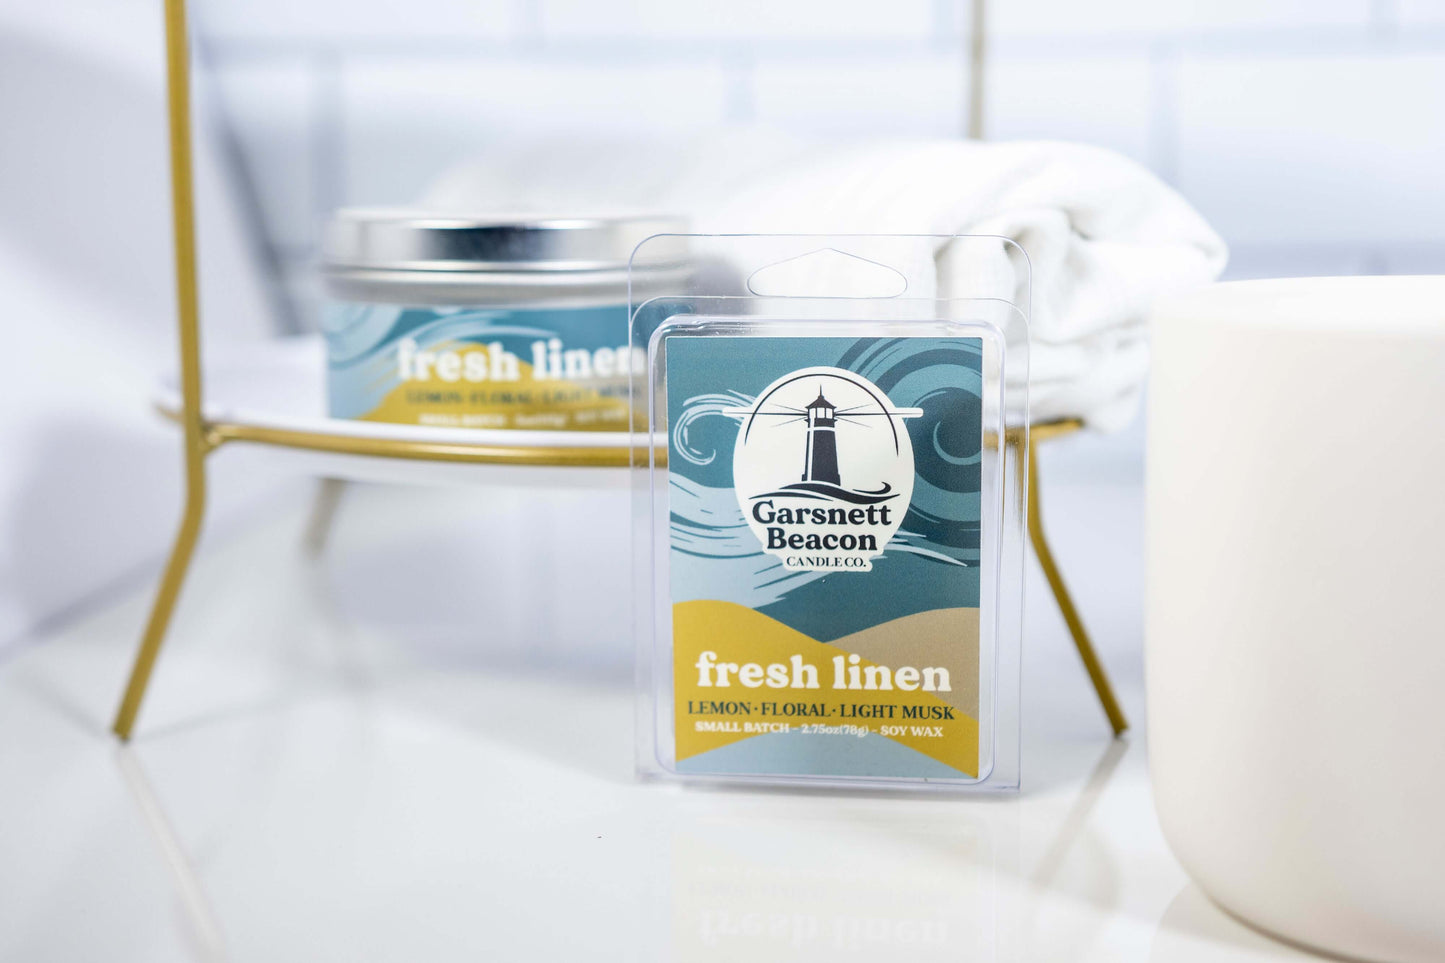 Lemon Linen Floral Ozone Light Musk scented candles called Fresh Linen in glass ceramic tin and wax melts